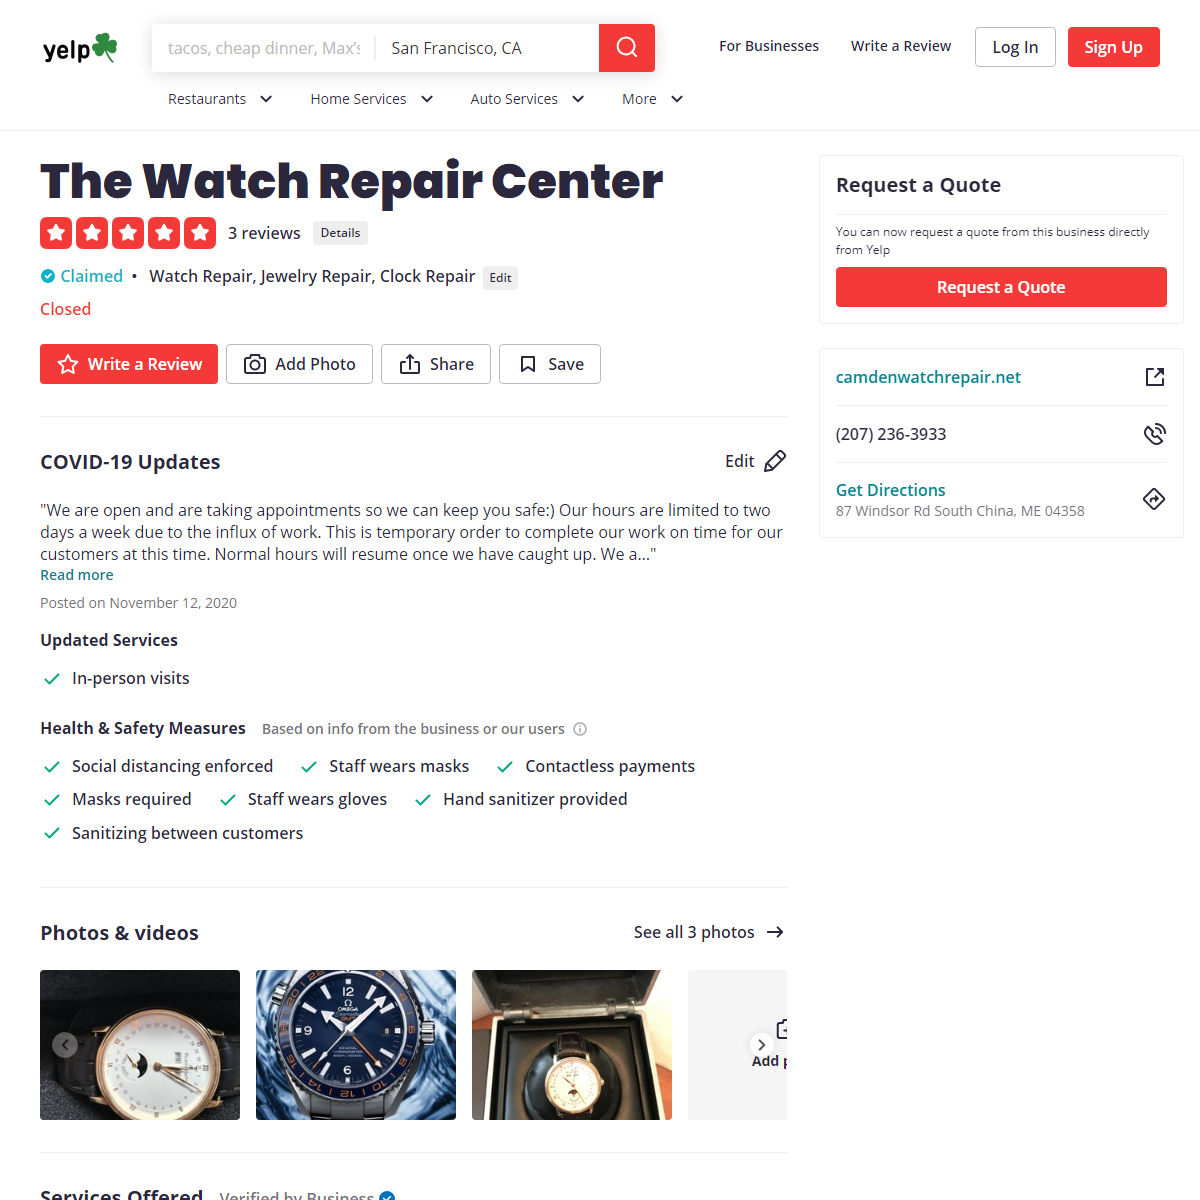 A complete backup of https://www.yelp.com/biz/the-watch-repair-center-south-china-2